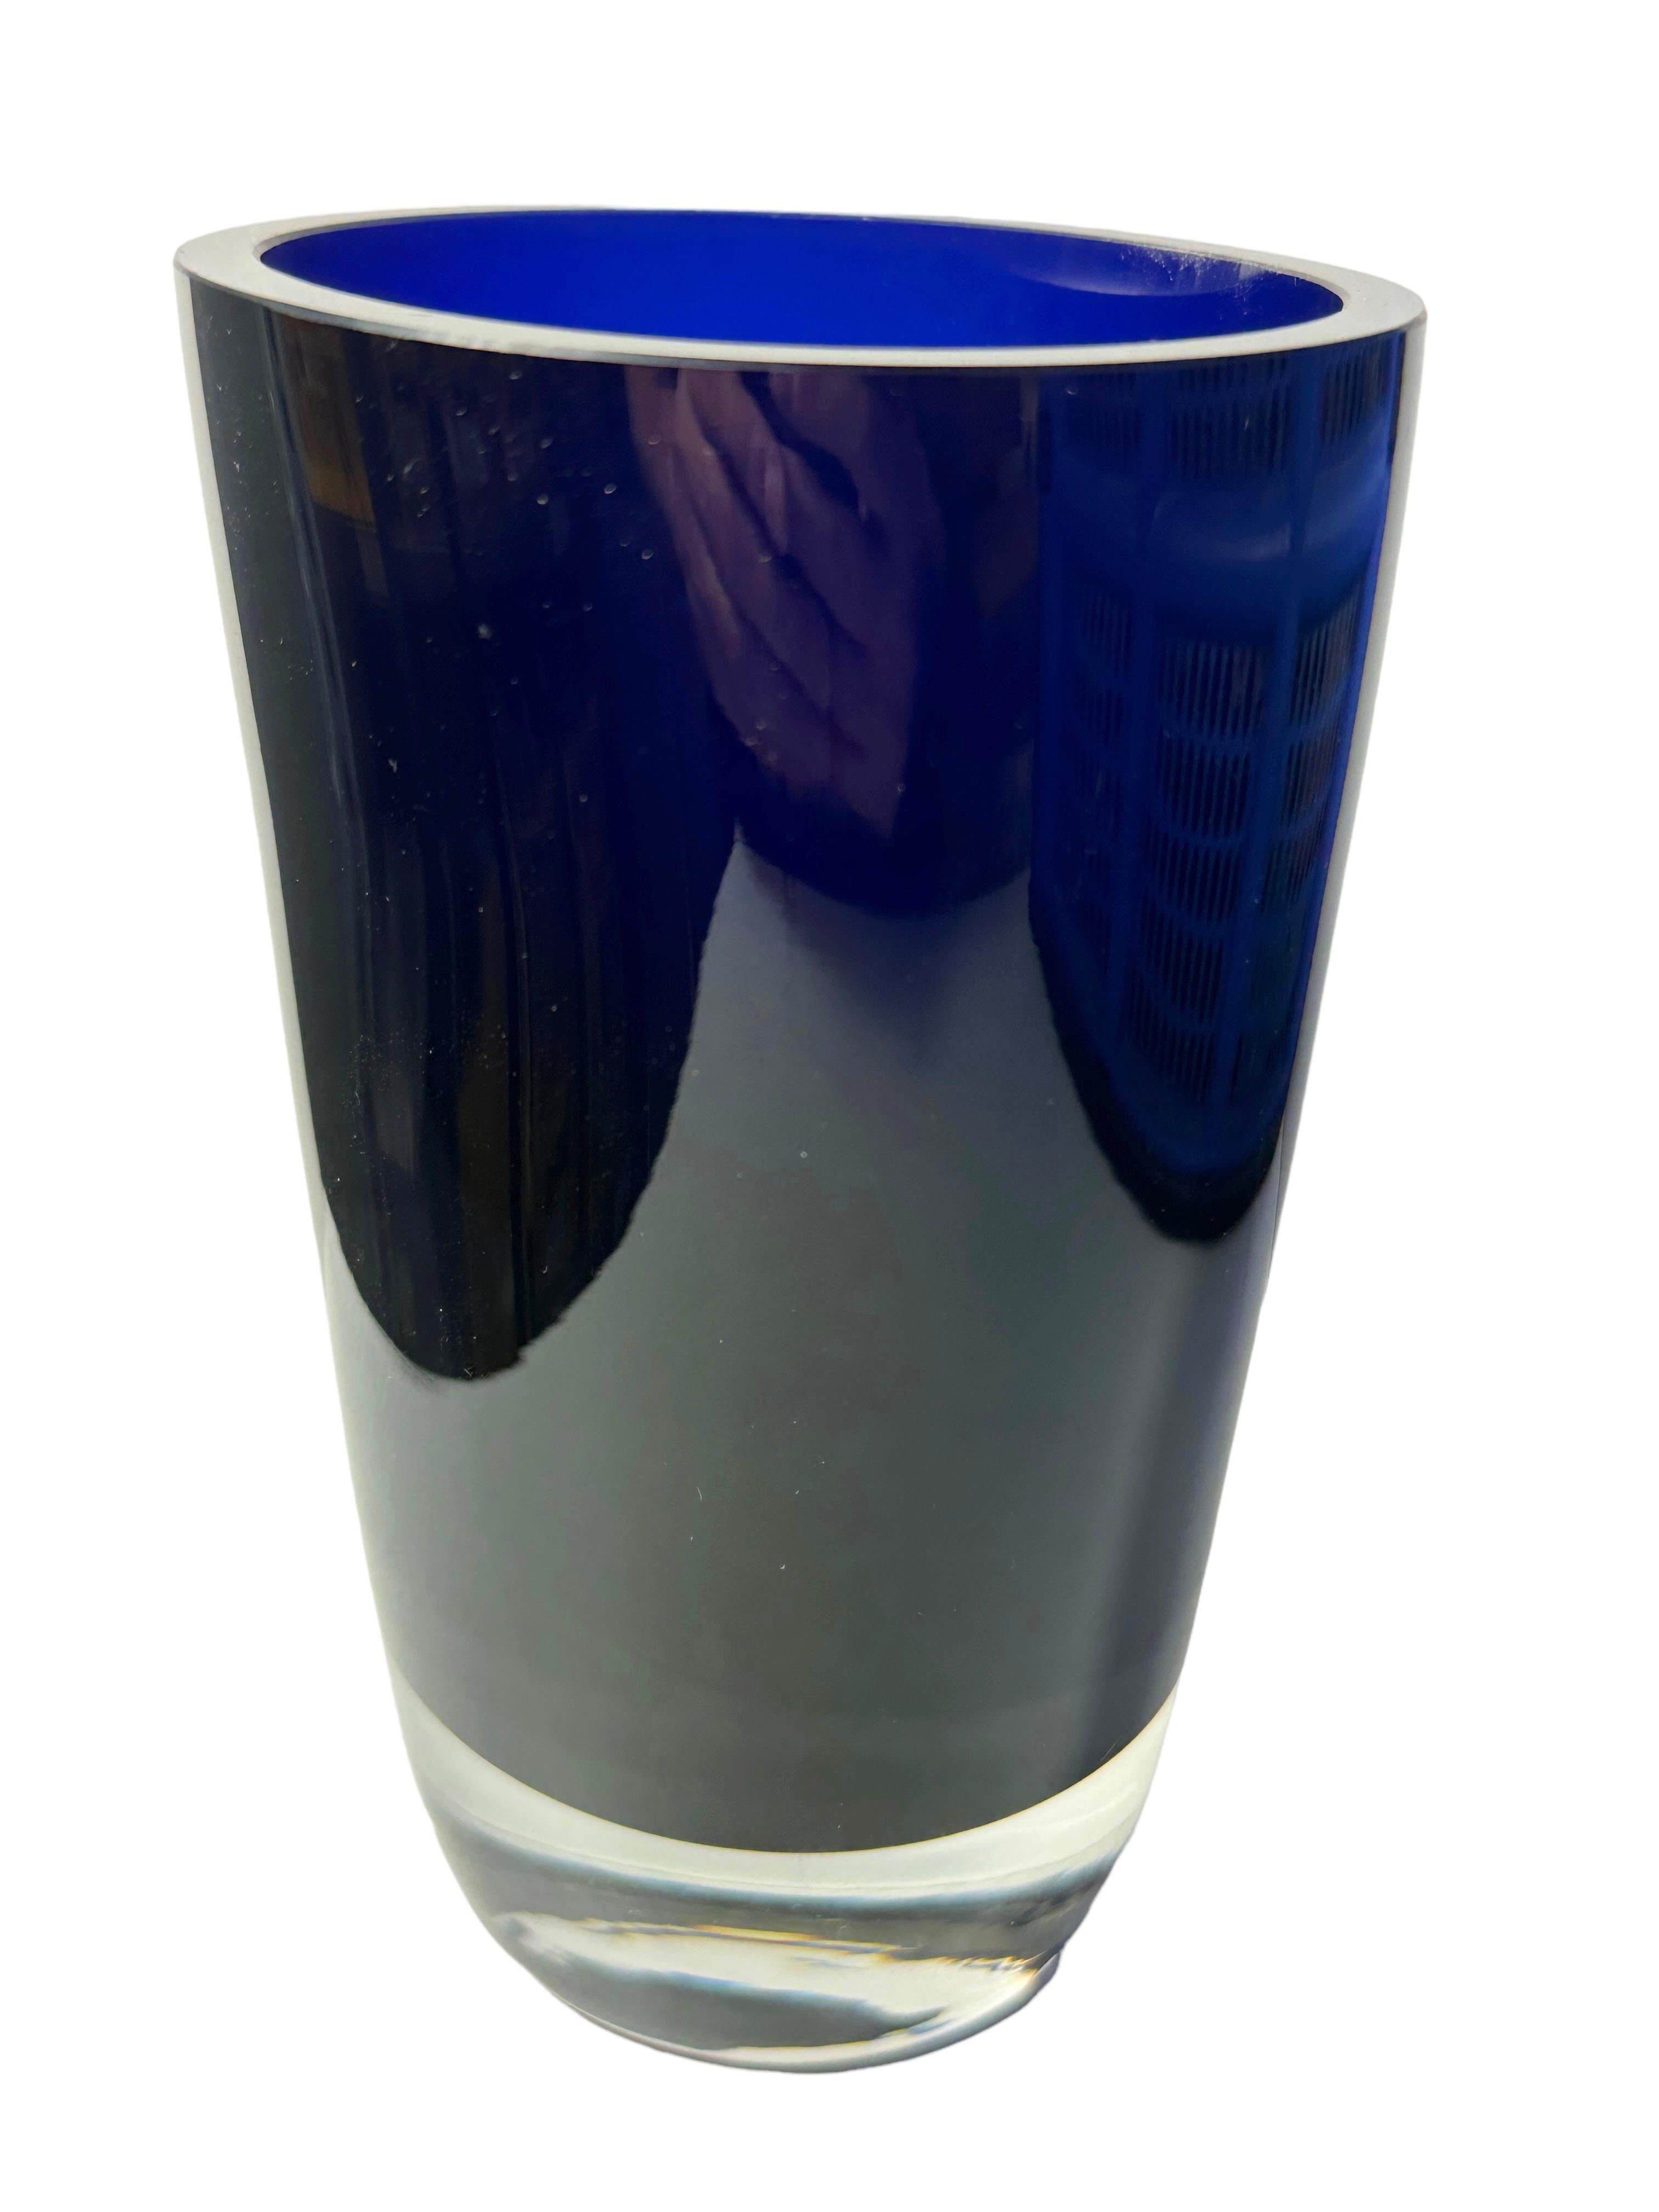 Marine Blue Murano Glass Vase Sommerso Vintage, Italy, 1950s For Sale 1